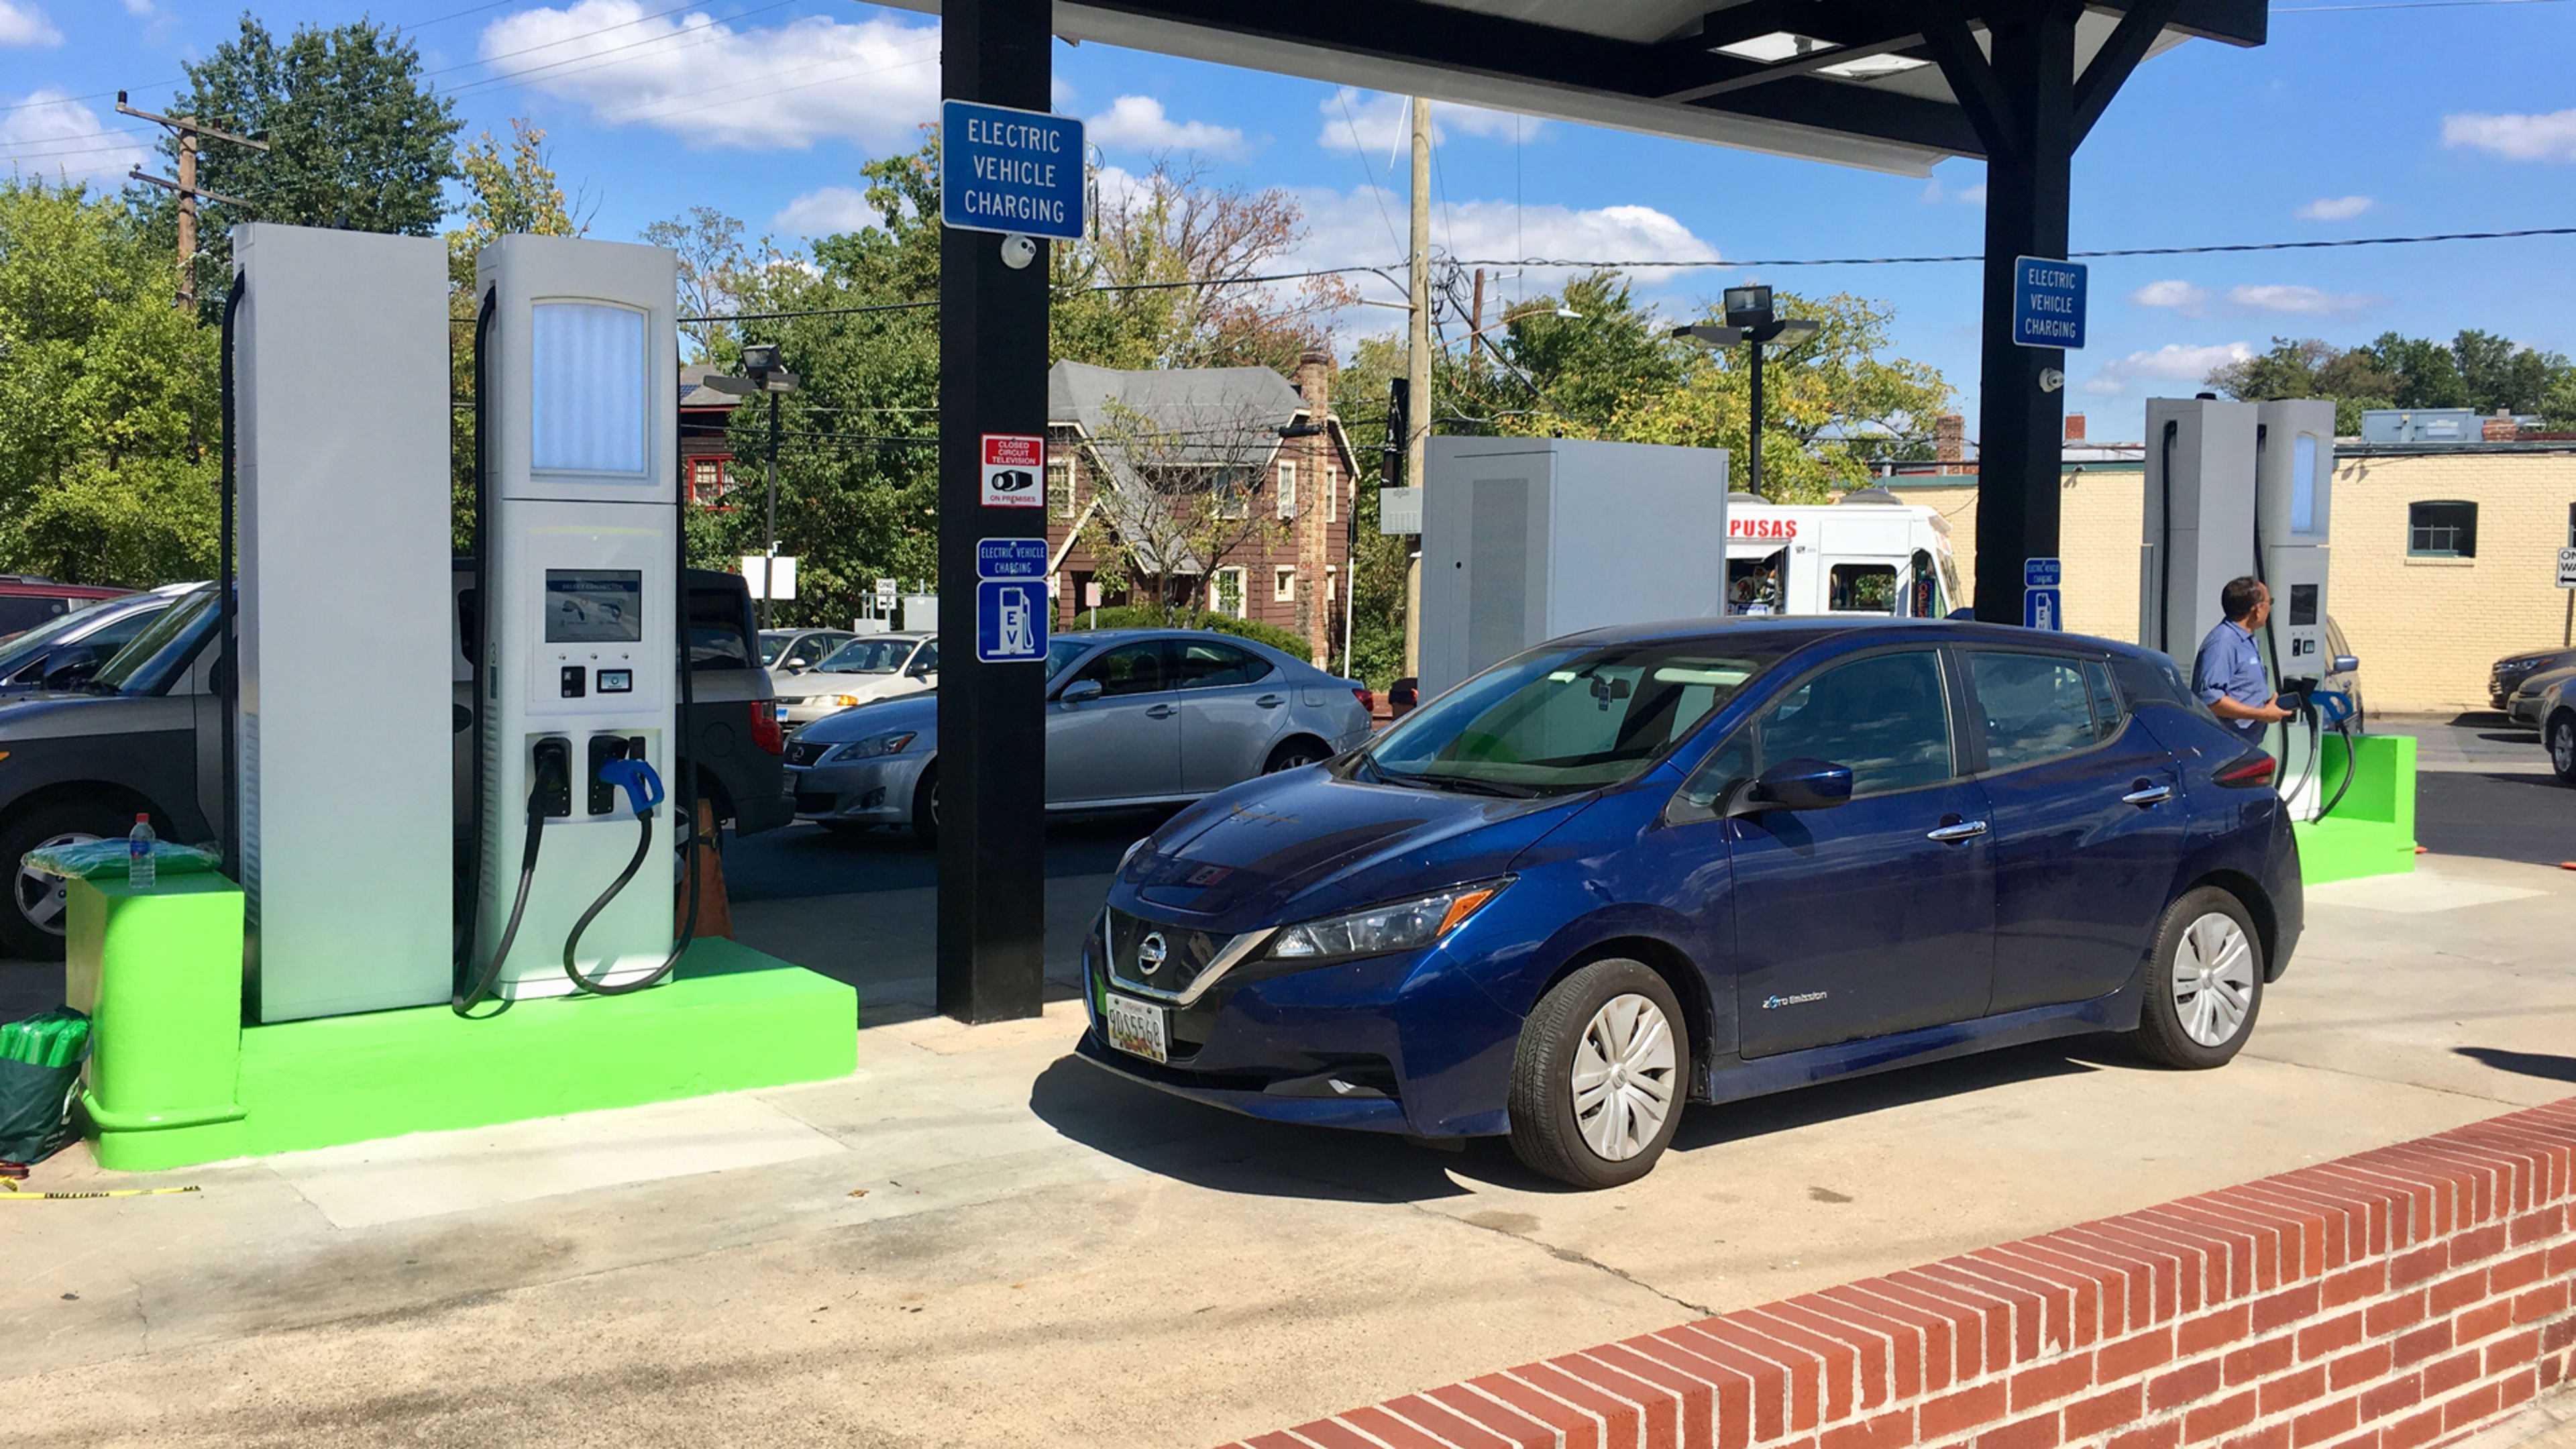 This gas station is the first in the U.S. to convert to all-electric vehicle chargers